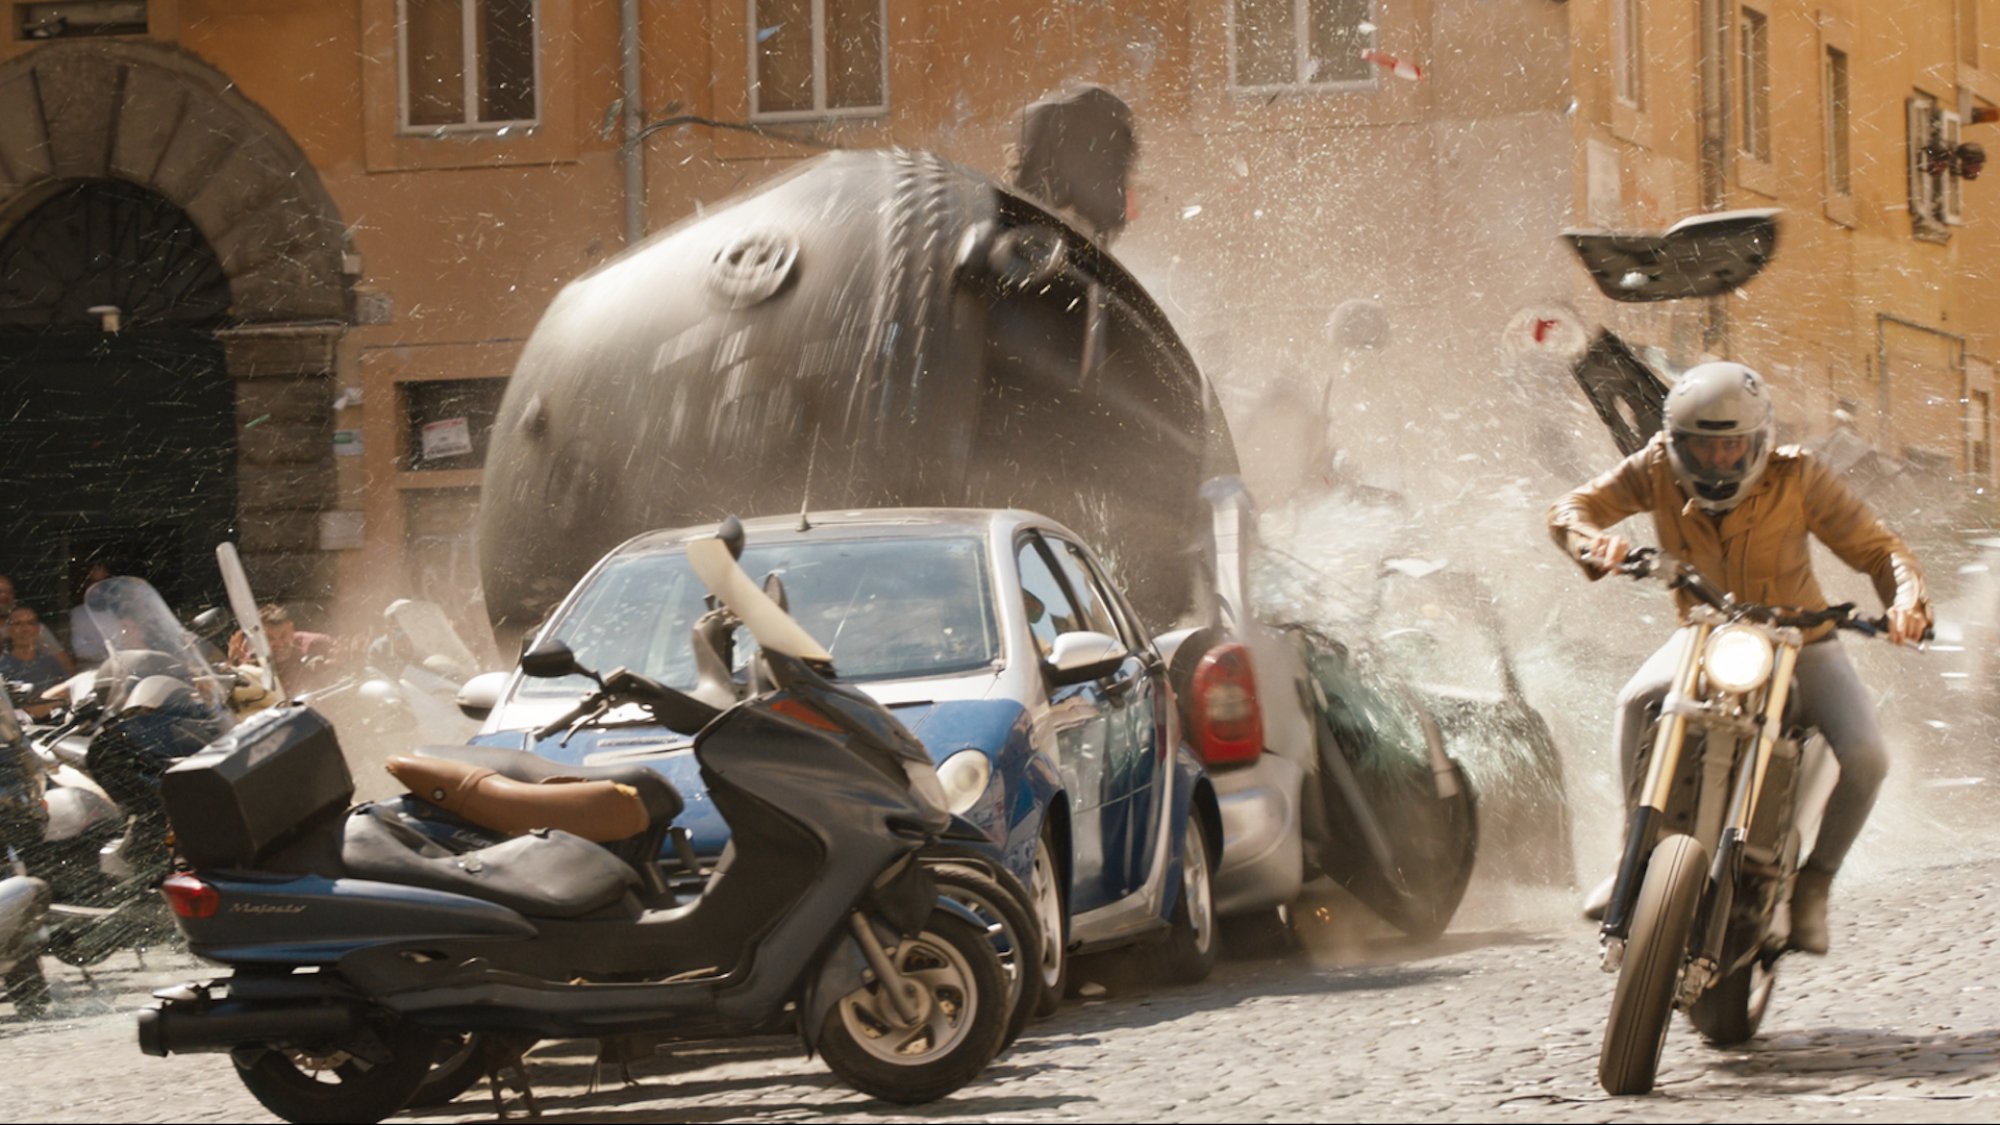 A giant spherical bomb does damage in Rome in "Fast X."